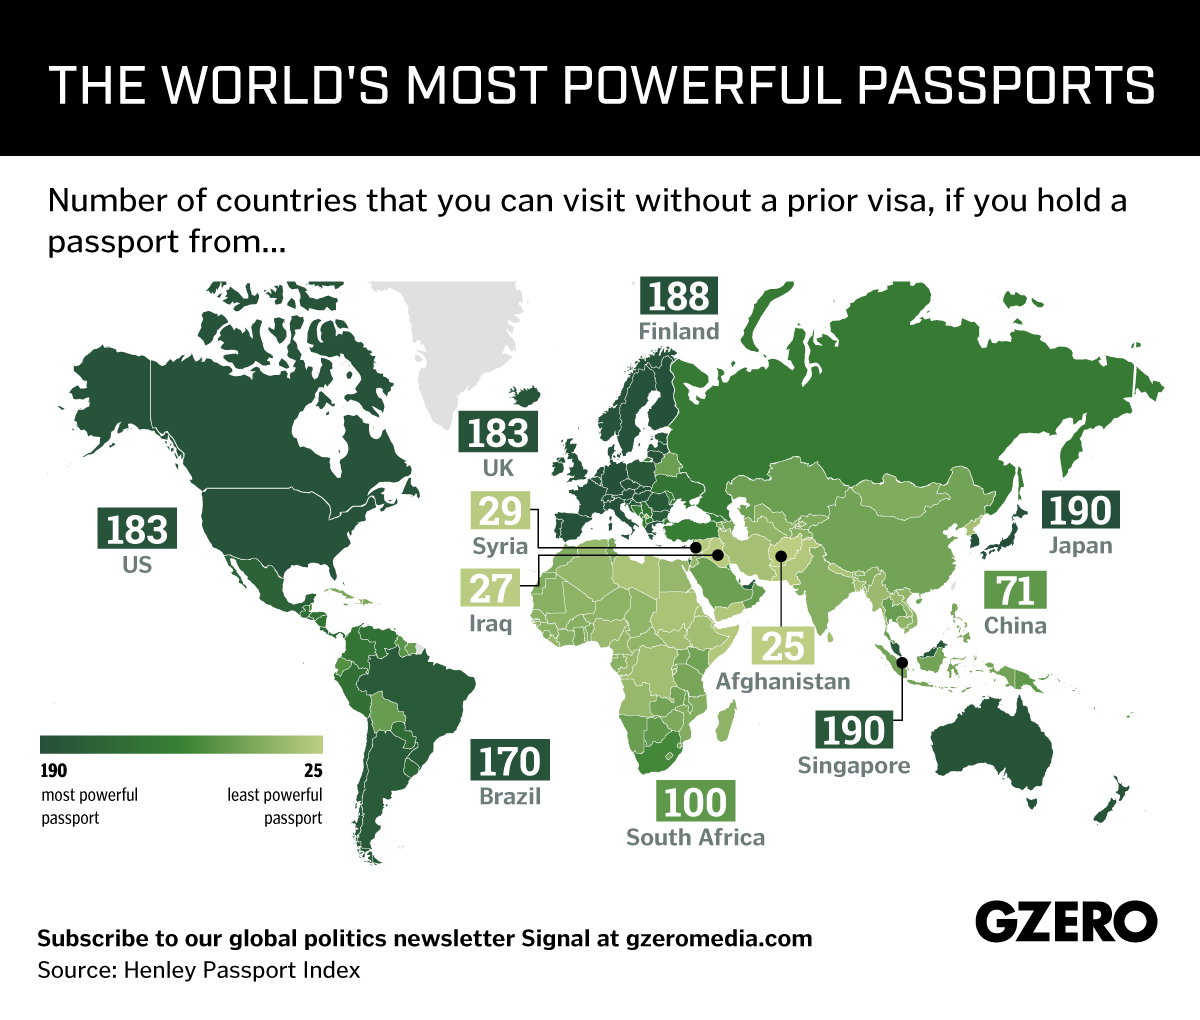 What are the most powerful passports in the world